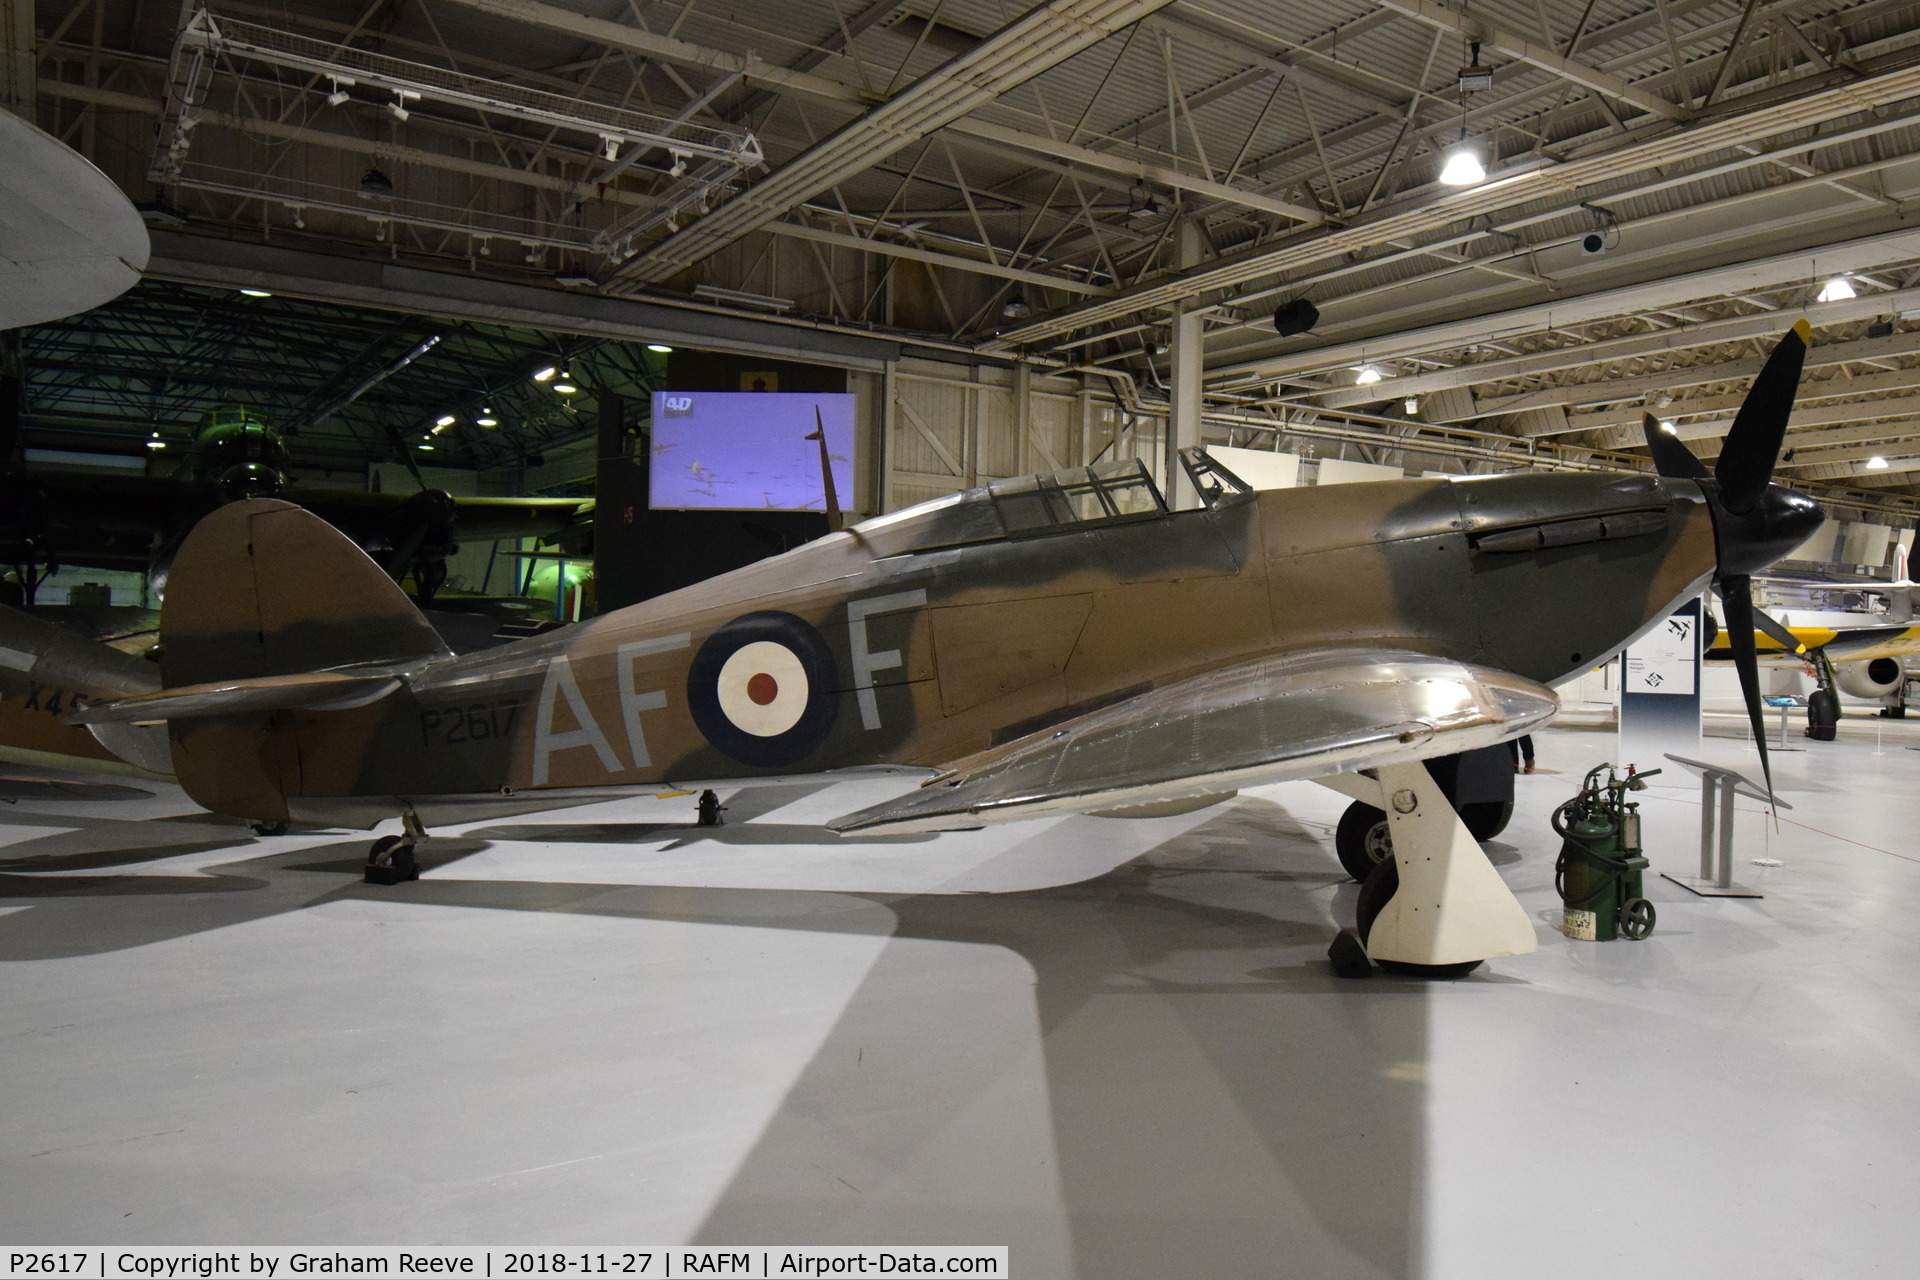 P2617, Hawker Hurricane I C/N Not found P2617, On display at the RAF Museum, Hendon.